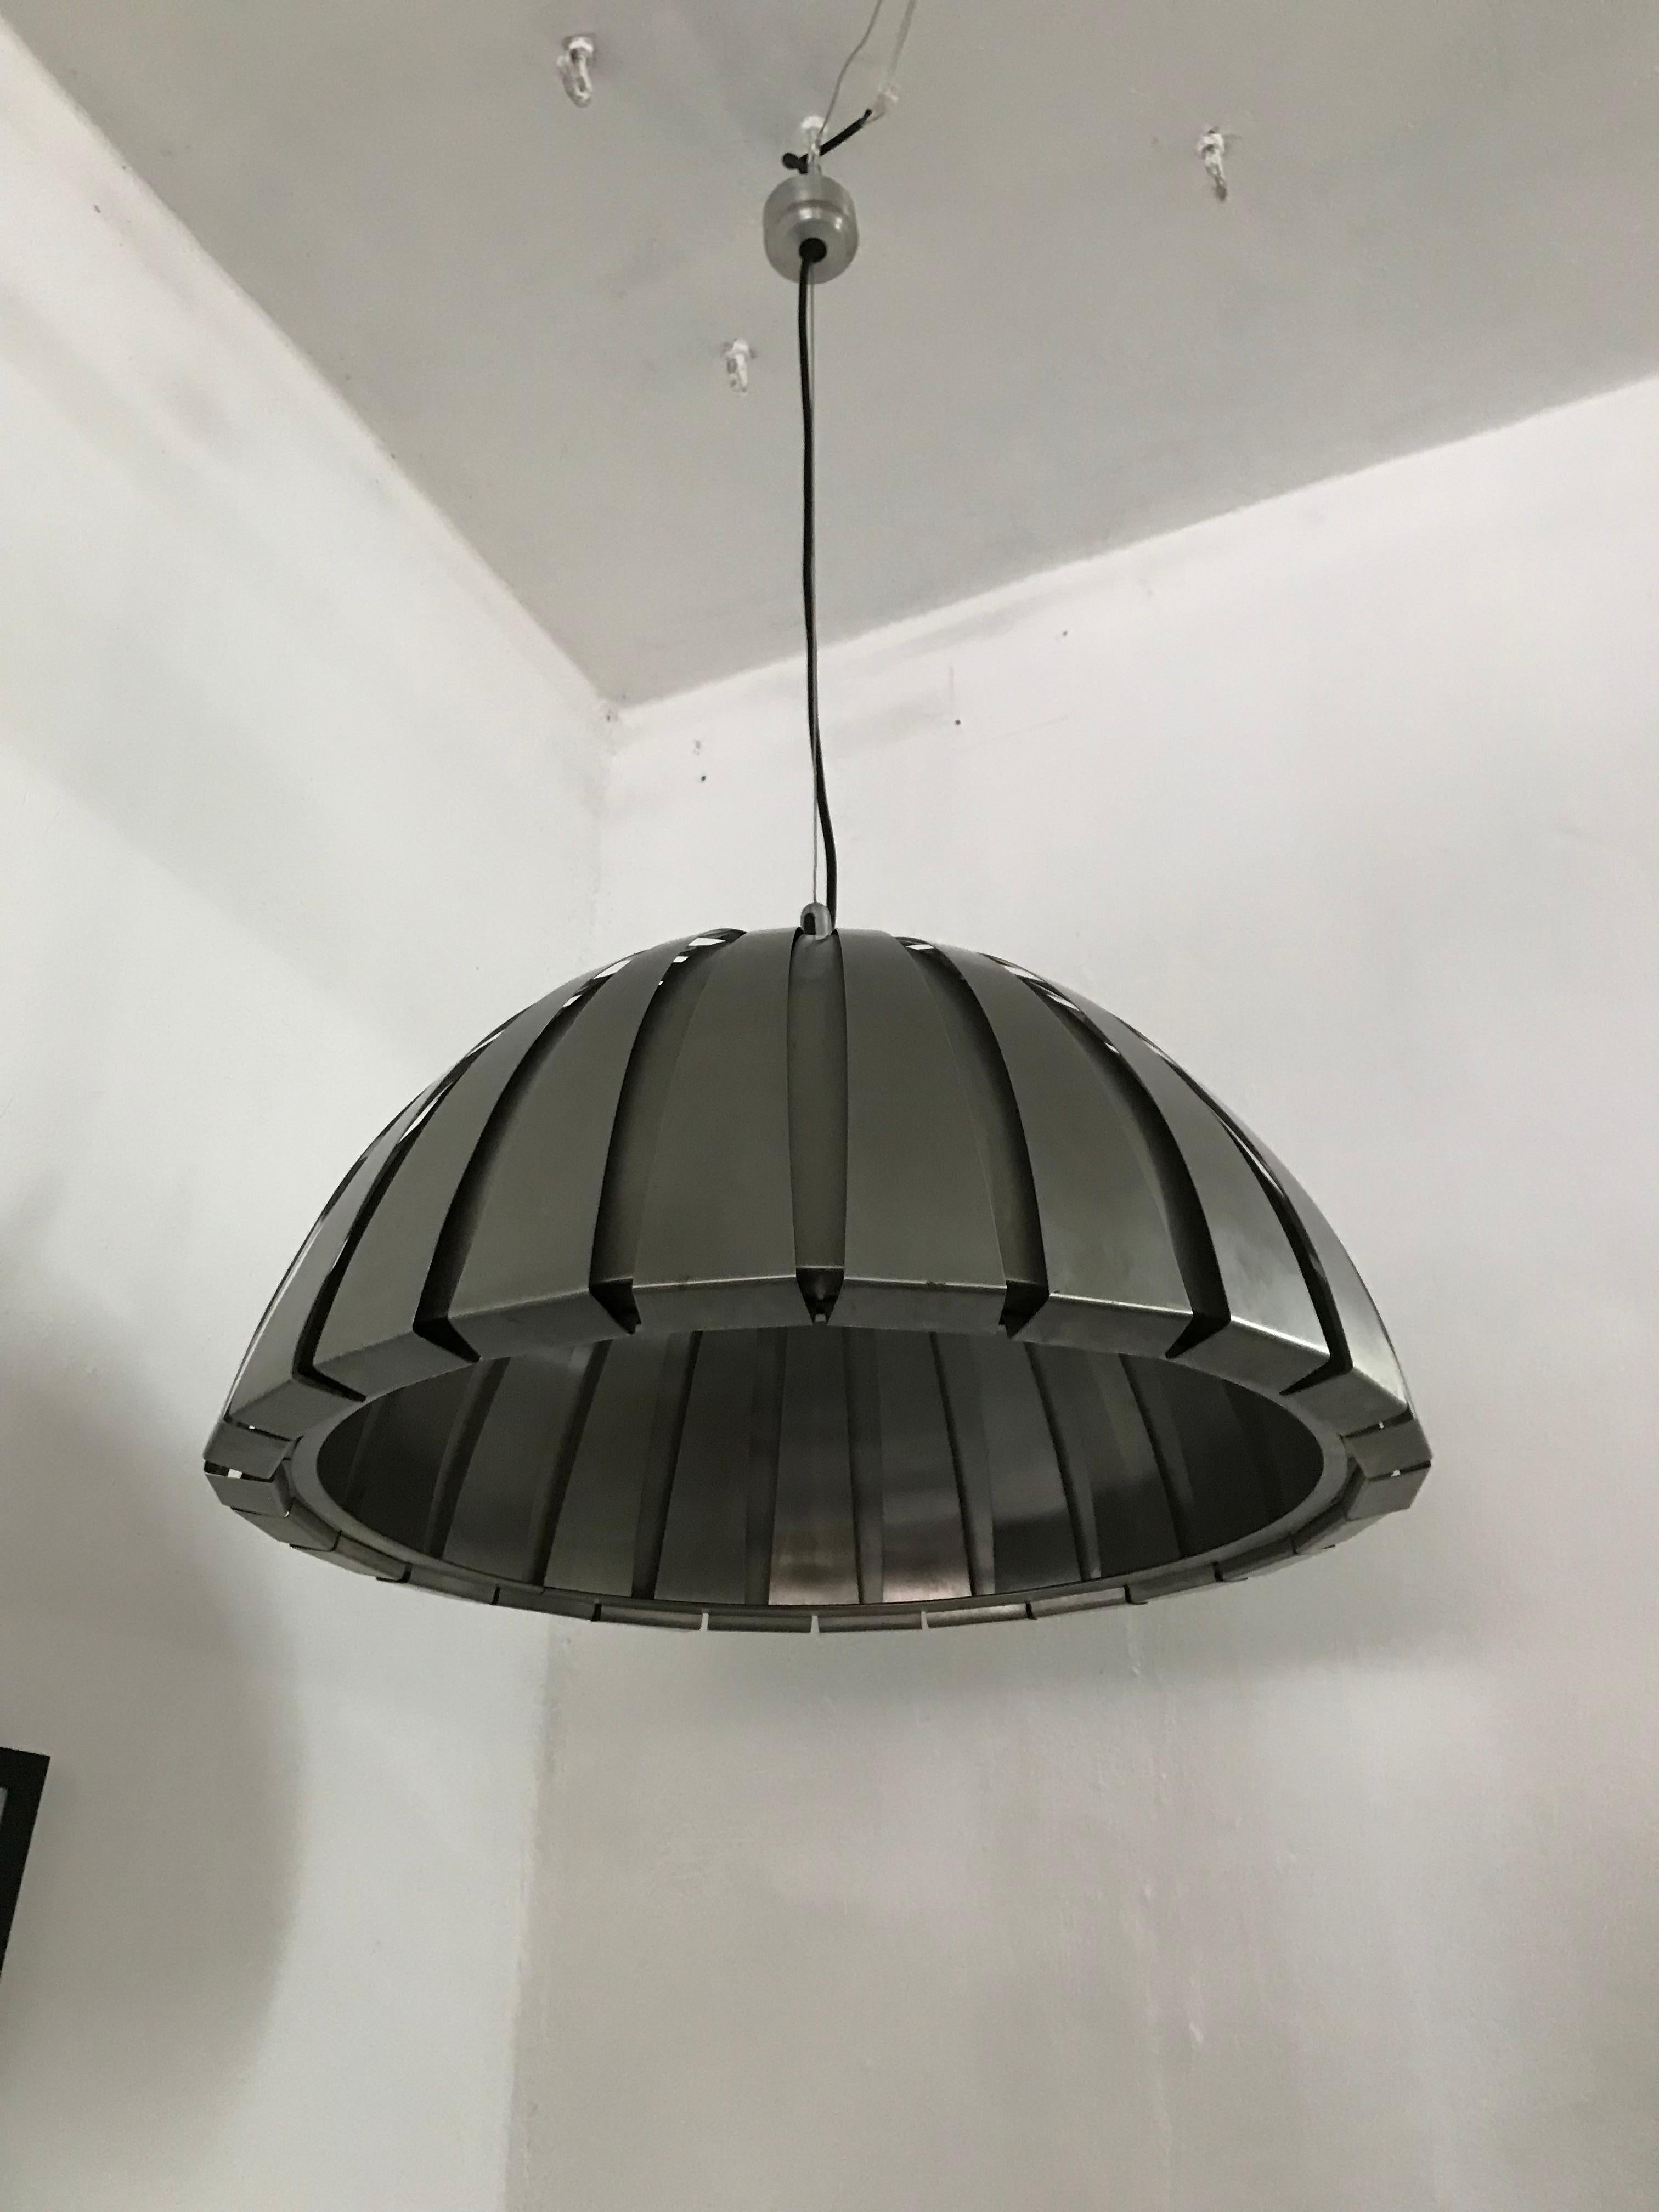 Space age pendant lamp, Model Calotta 1749 designed by Elio Martinelli for Martinelli Luce, in brushed stainless steel, still holding the original sticker.